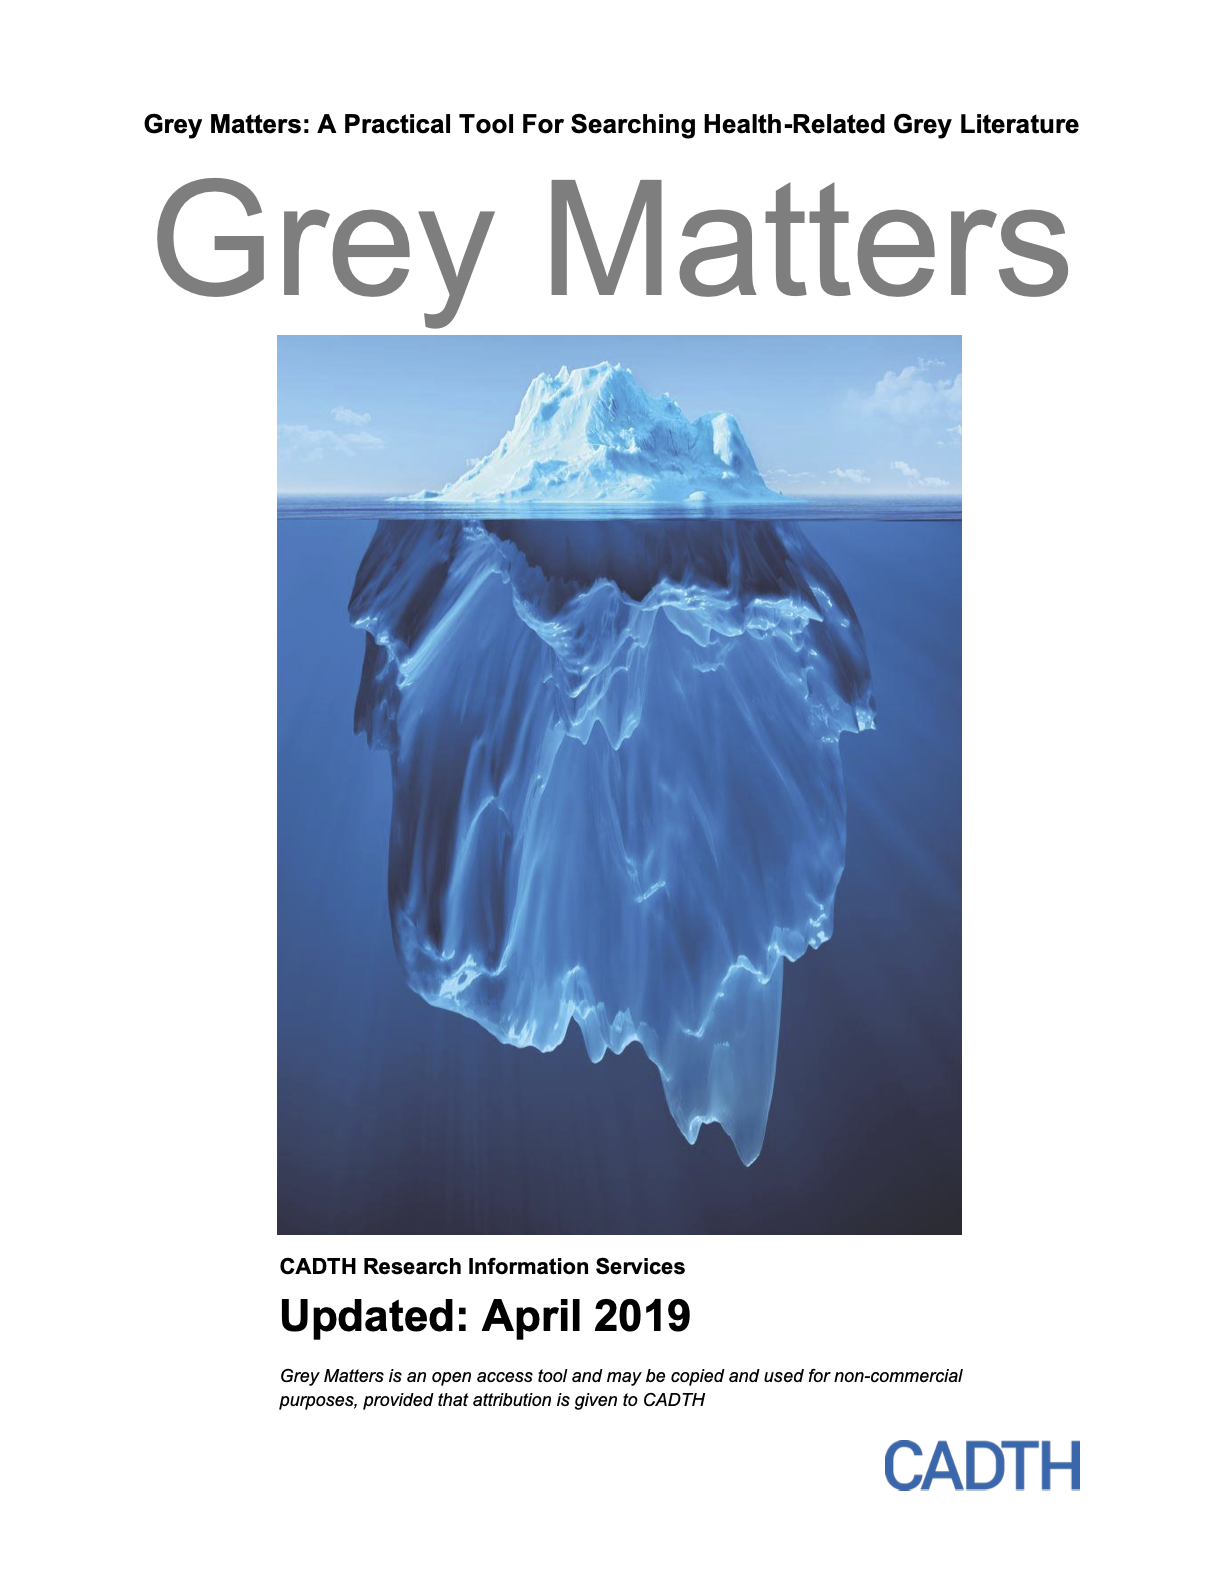 Grey Matters: A Practical Tool for Searching Health-related Grey Literature